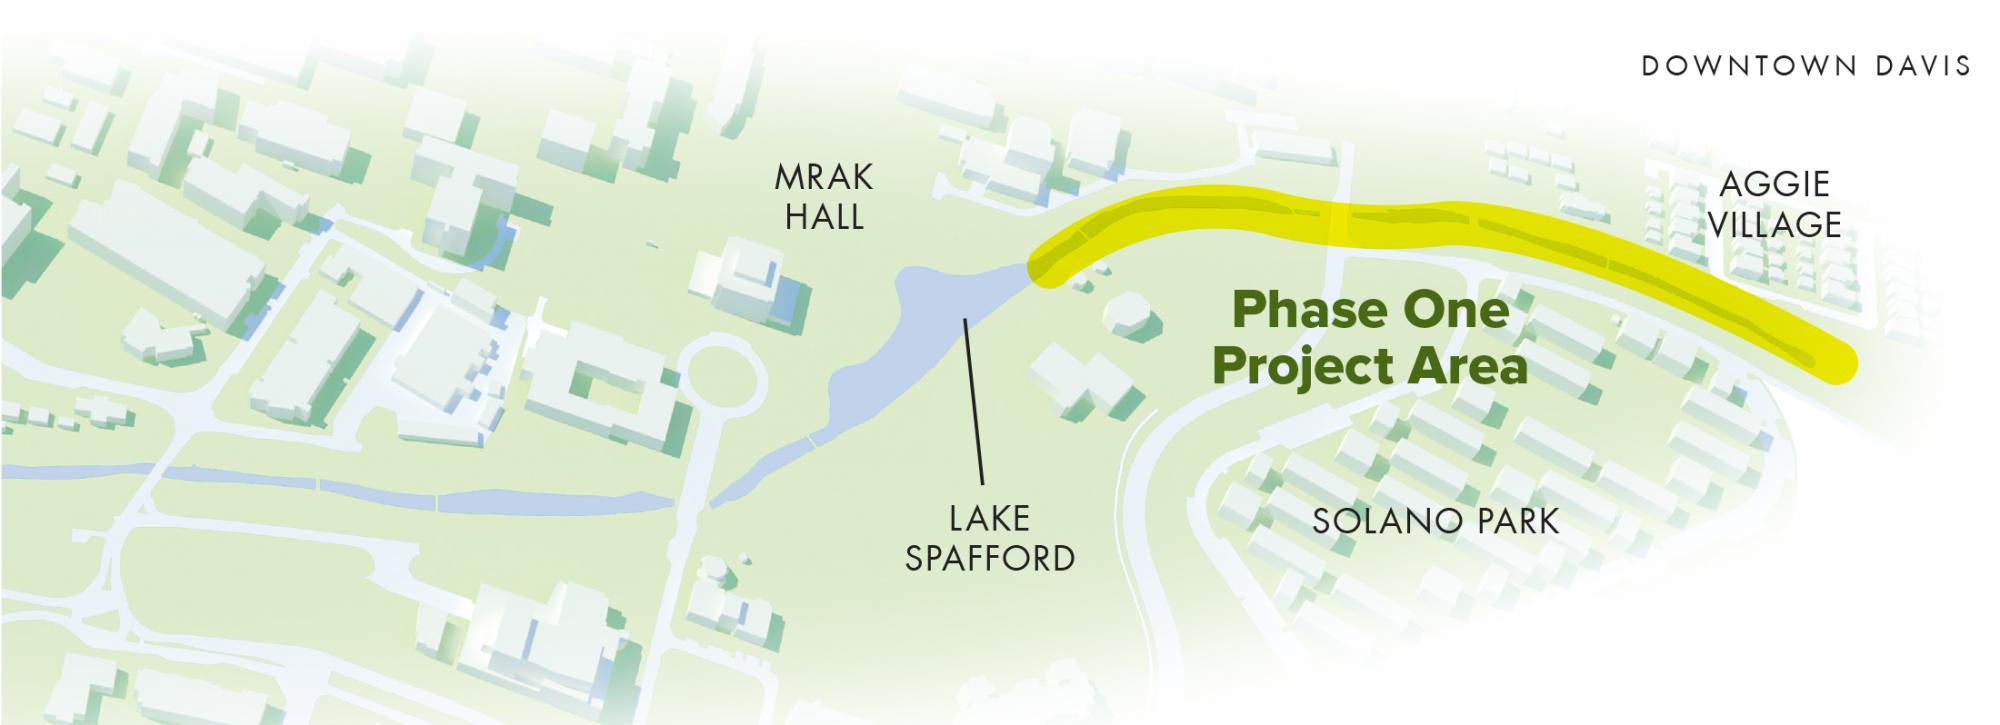  Phase 1 (east end), Arboretum Waterway improvement project